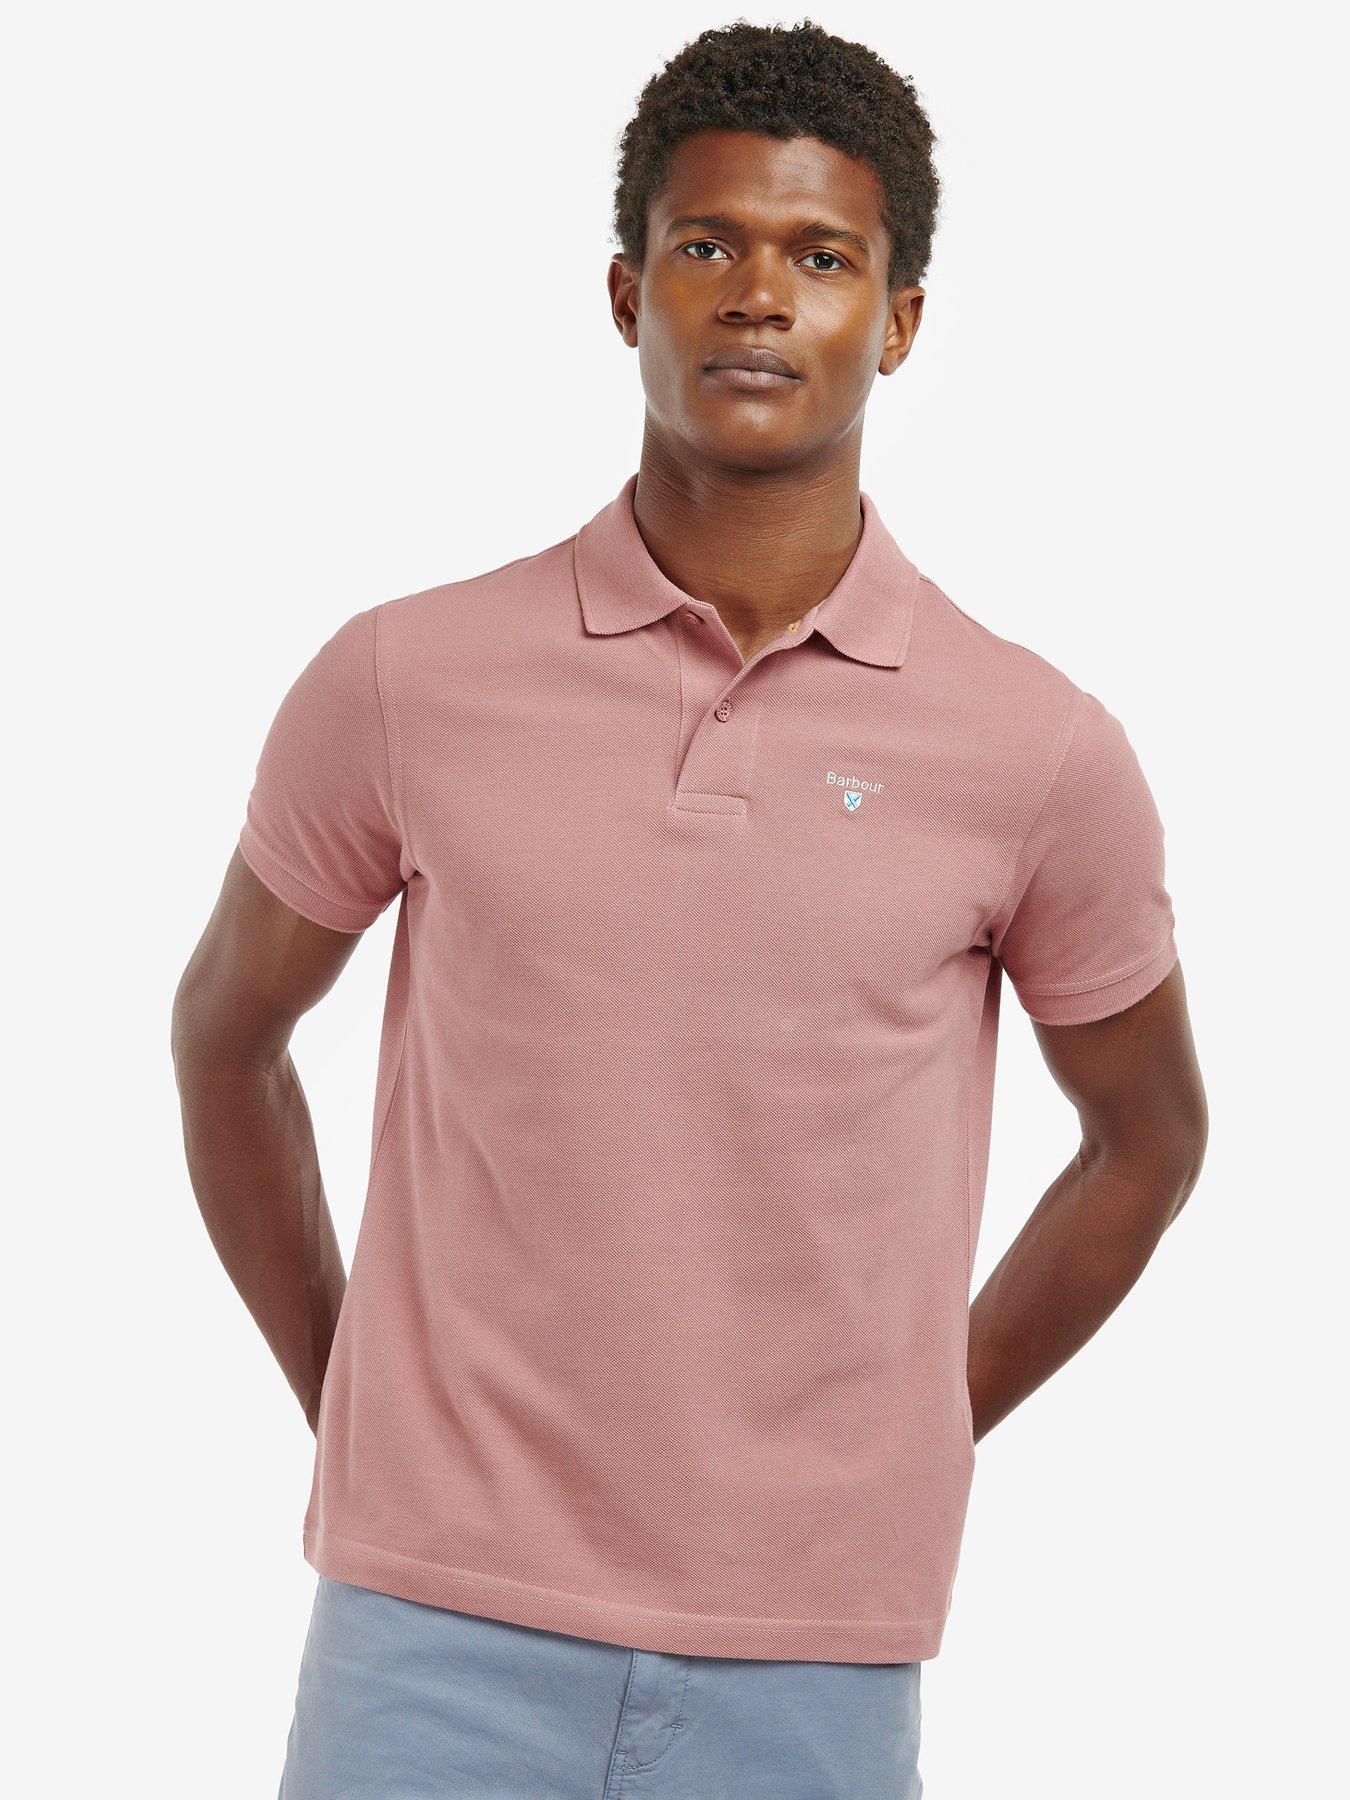 Barbour Sports Shirt Pink Polo 